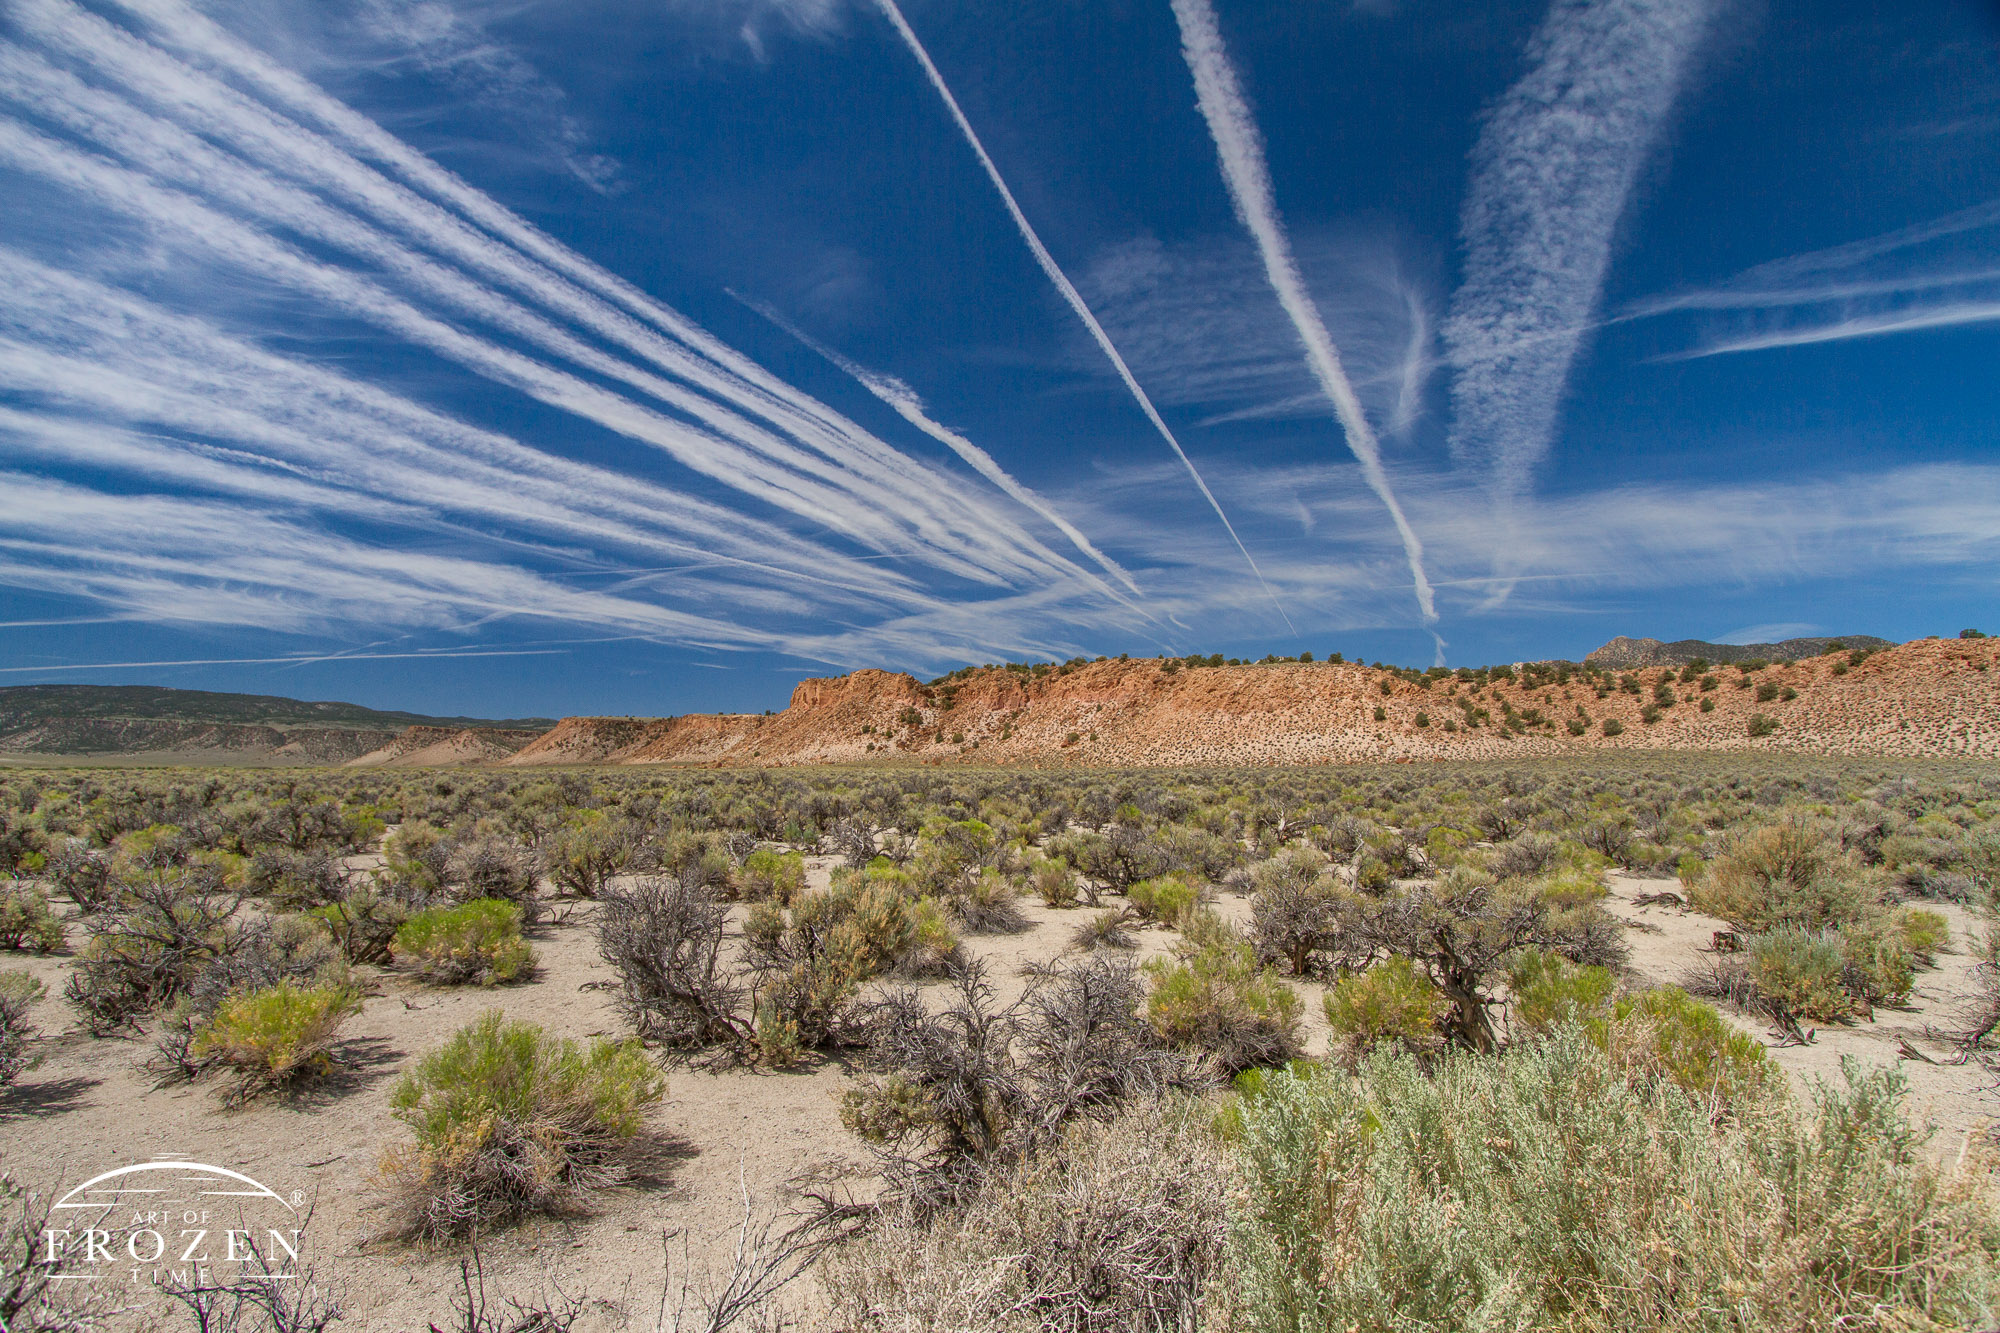 A series of contrails over eastern California which stretch across the blue sky in successive rows